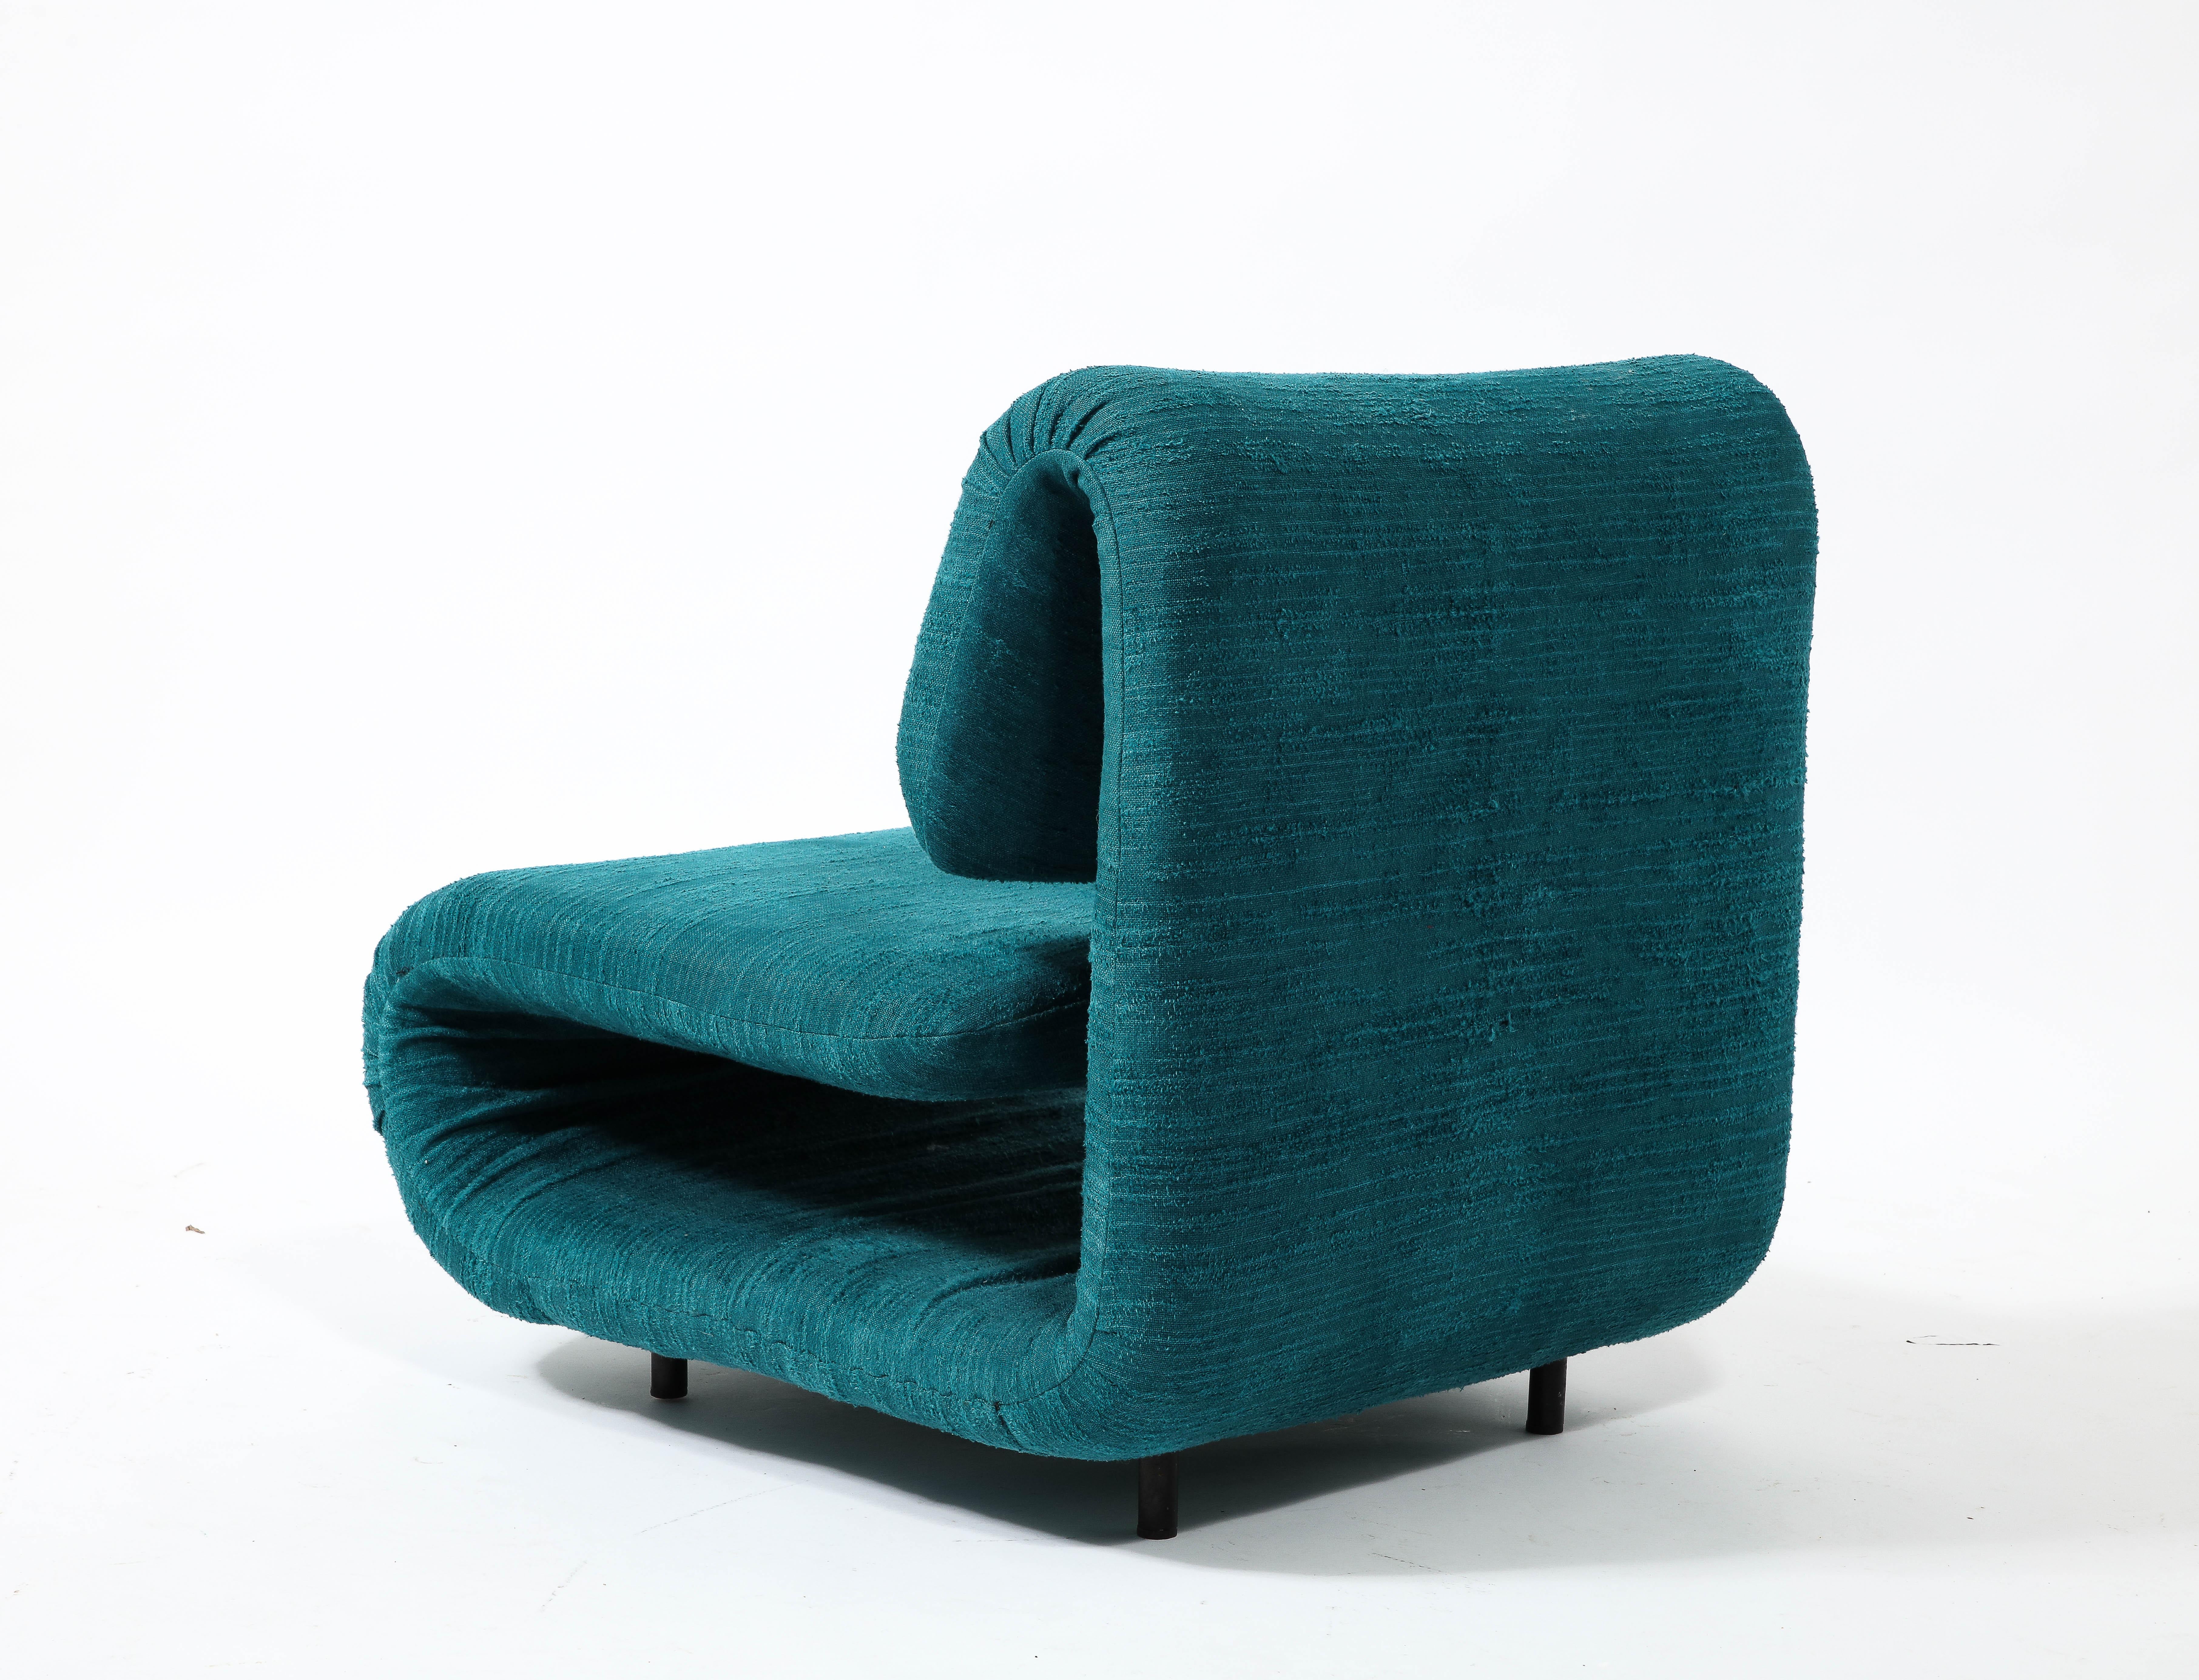 20th Century Etienne-Henri Martin Pair of 1500 Slipper Lounge Chairs in Teal, France 1960's For Sale